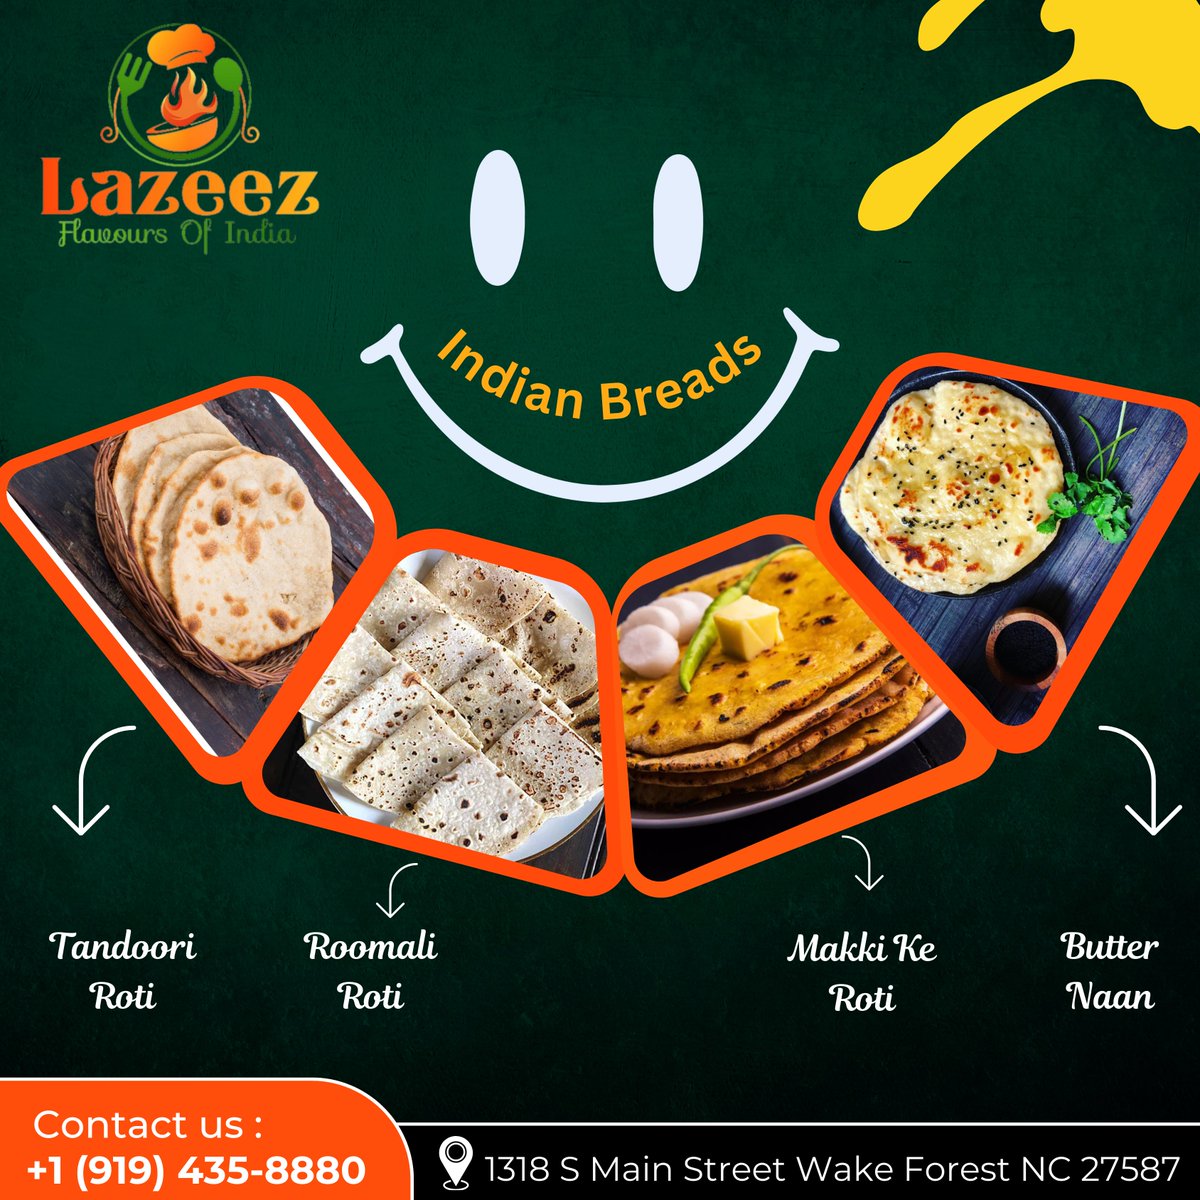 🍽️
Immerse yourself in the variety of tastes, and pair our Indian bread with your favorite curries, dals, and kebabs to create a symphony of flavors that will transport your taste buds straight to India.

🌐 lazeeznc.com

#LazeezRestaurant #TrianglePark #WakeForest